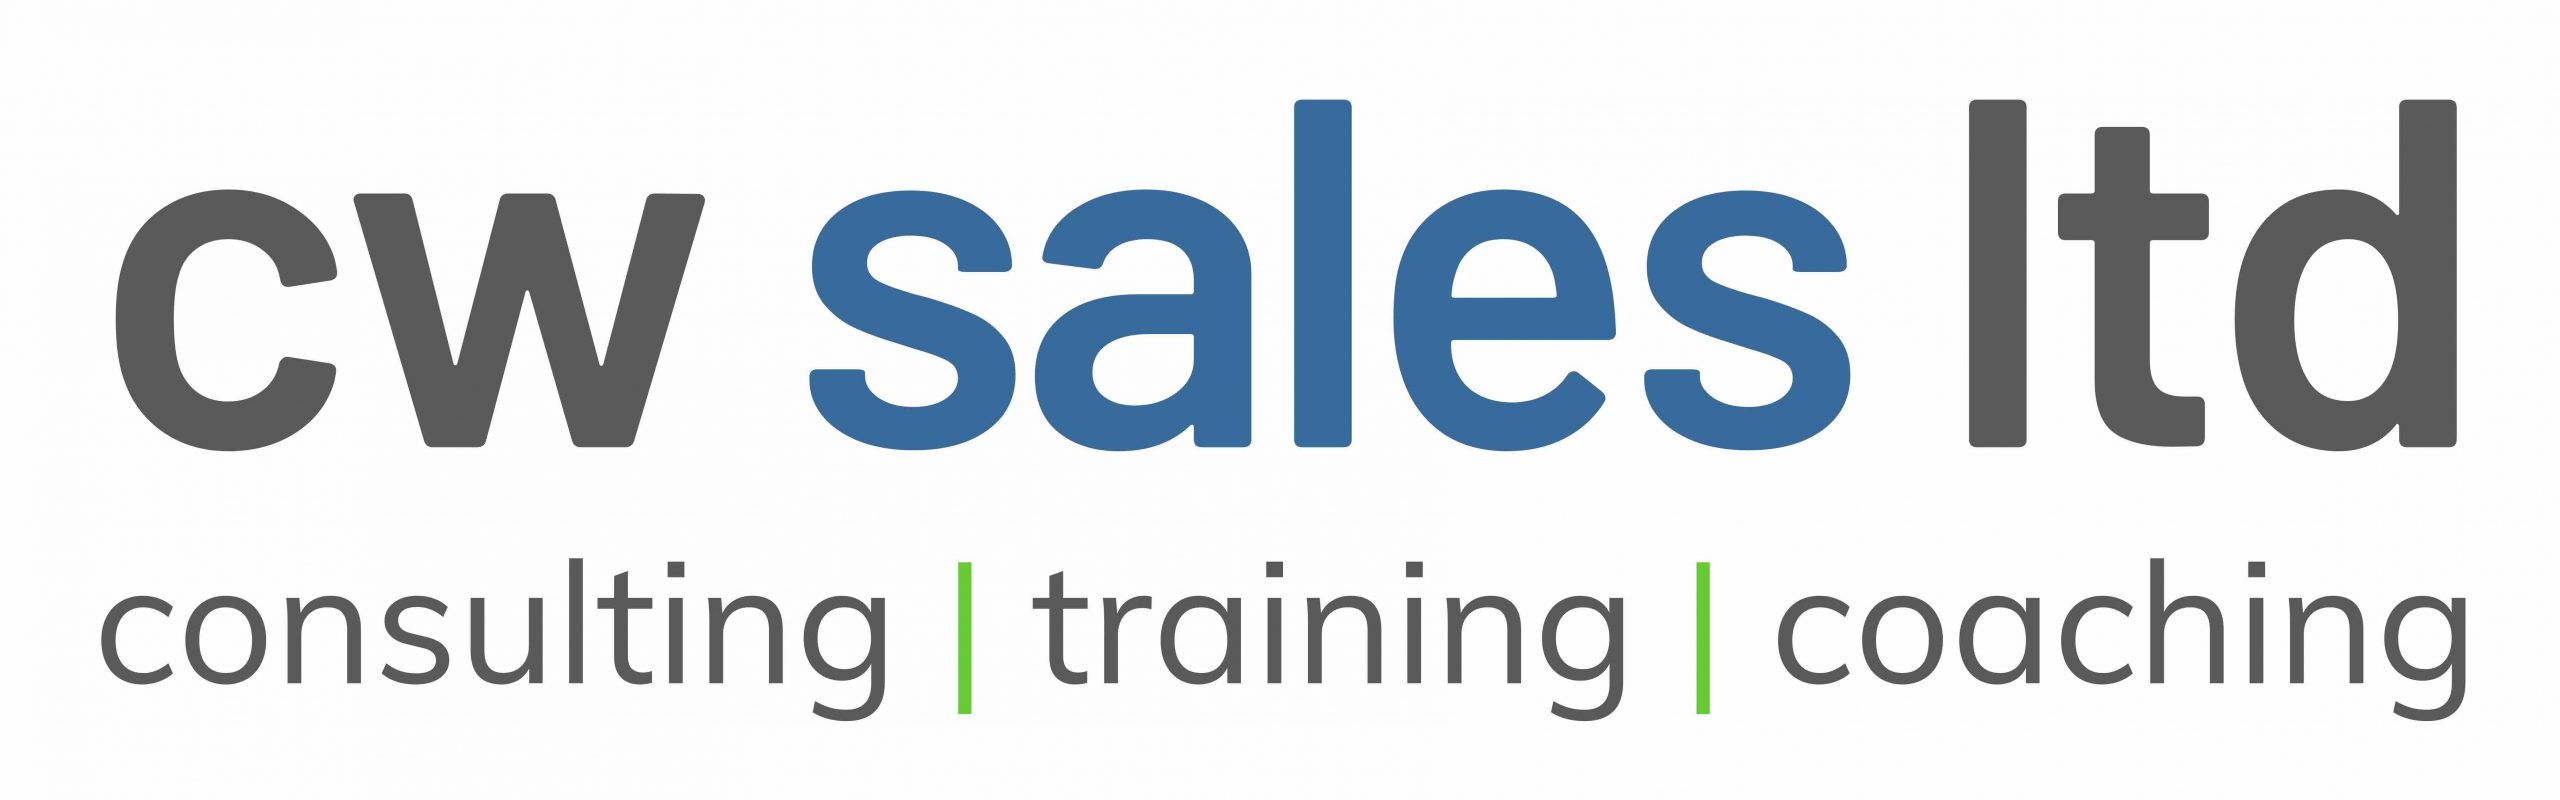 CW Sales Technical Sales Consultancy Training and Coaching